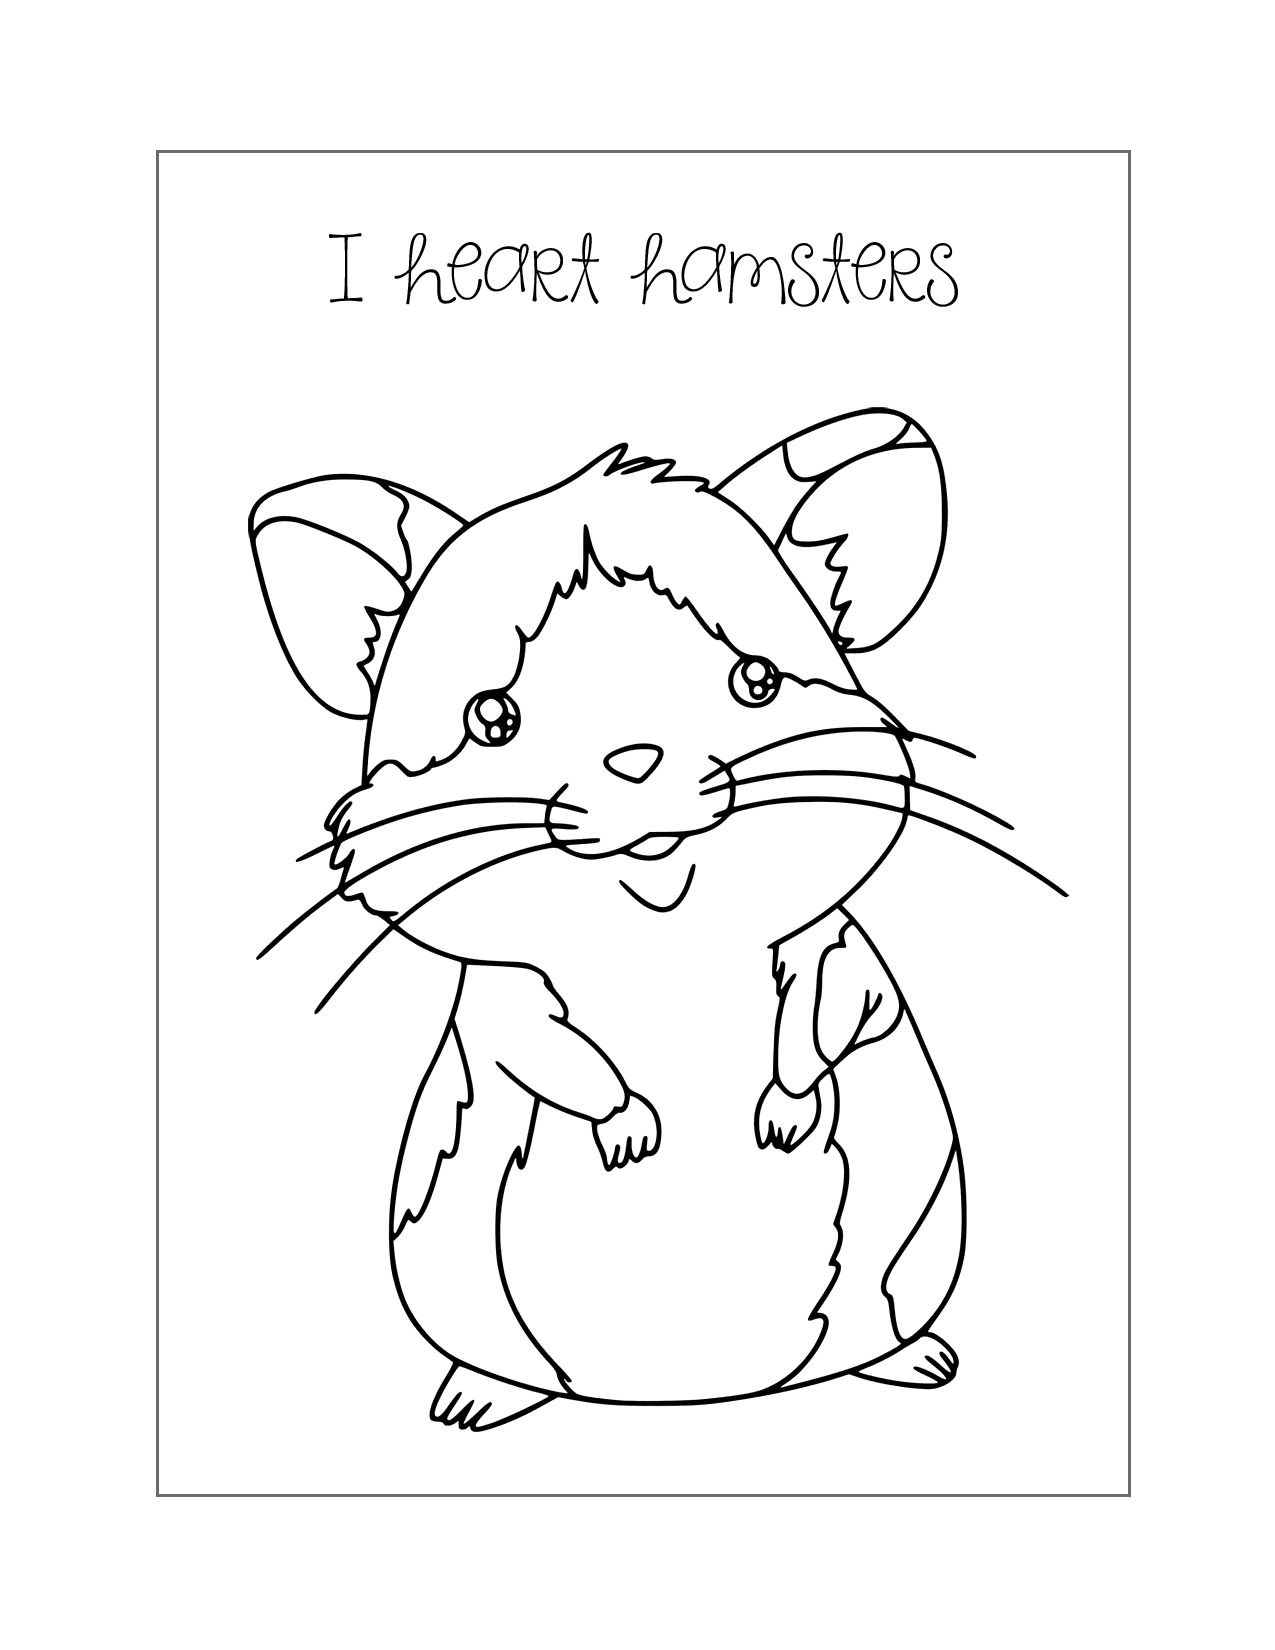 I Heart Hamsters Coloring Page